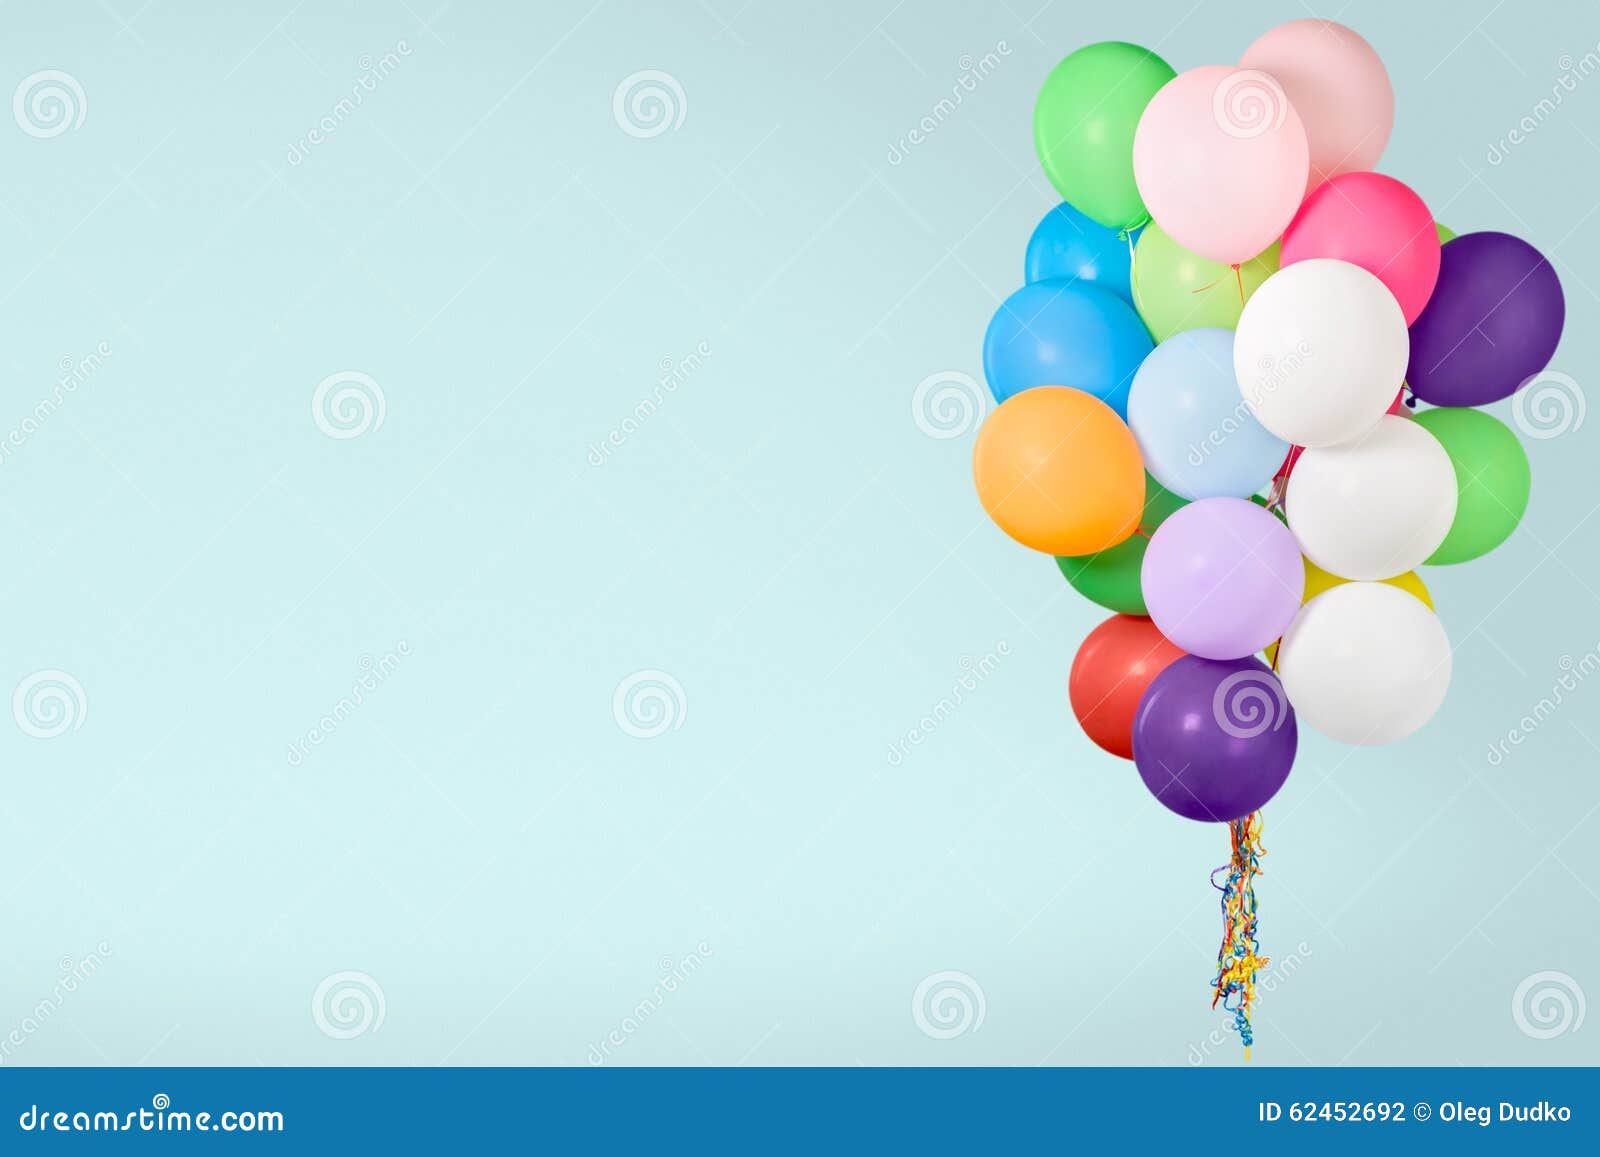 41,541 Balloon String Royalty-Free Images, Stock Photos & Pictures